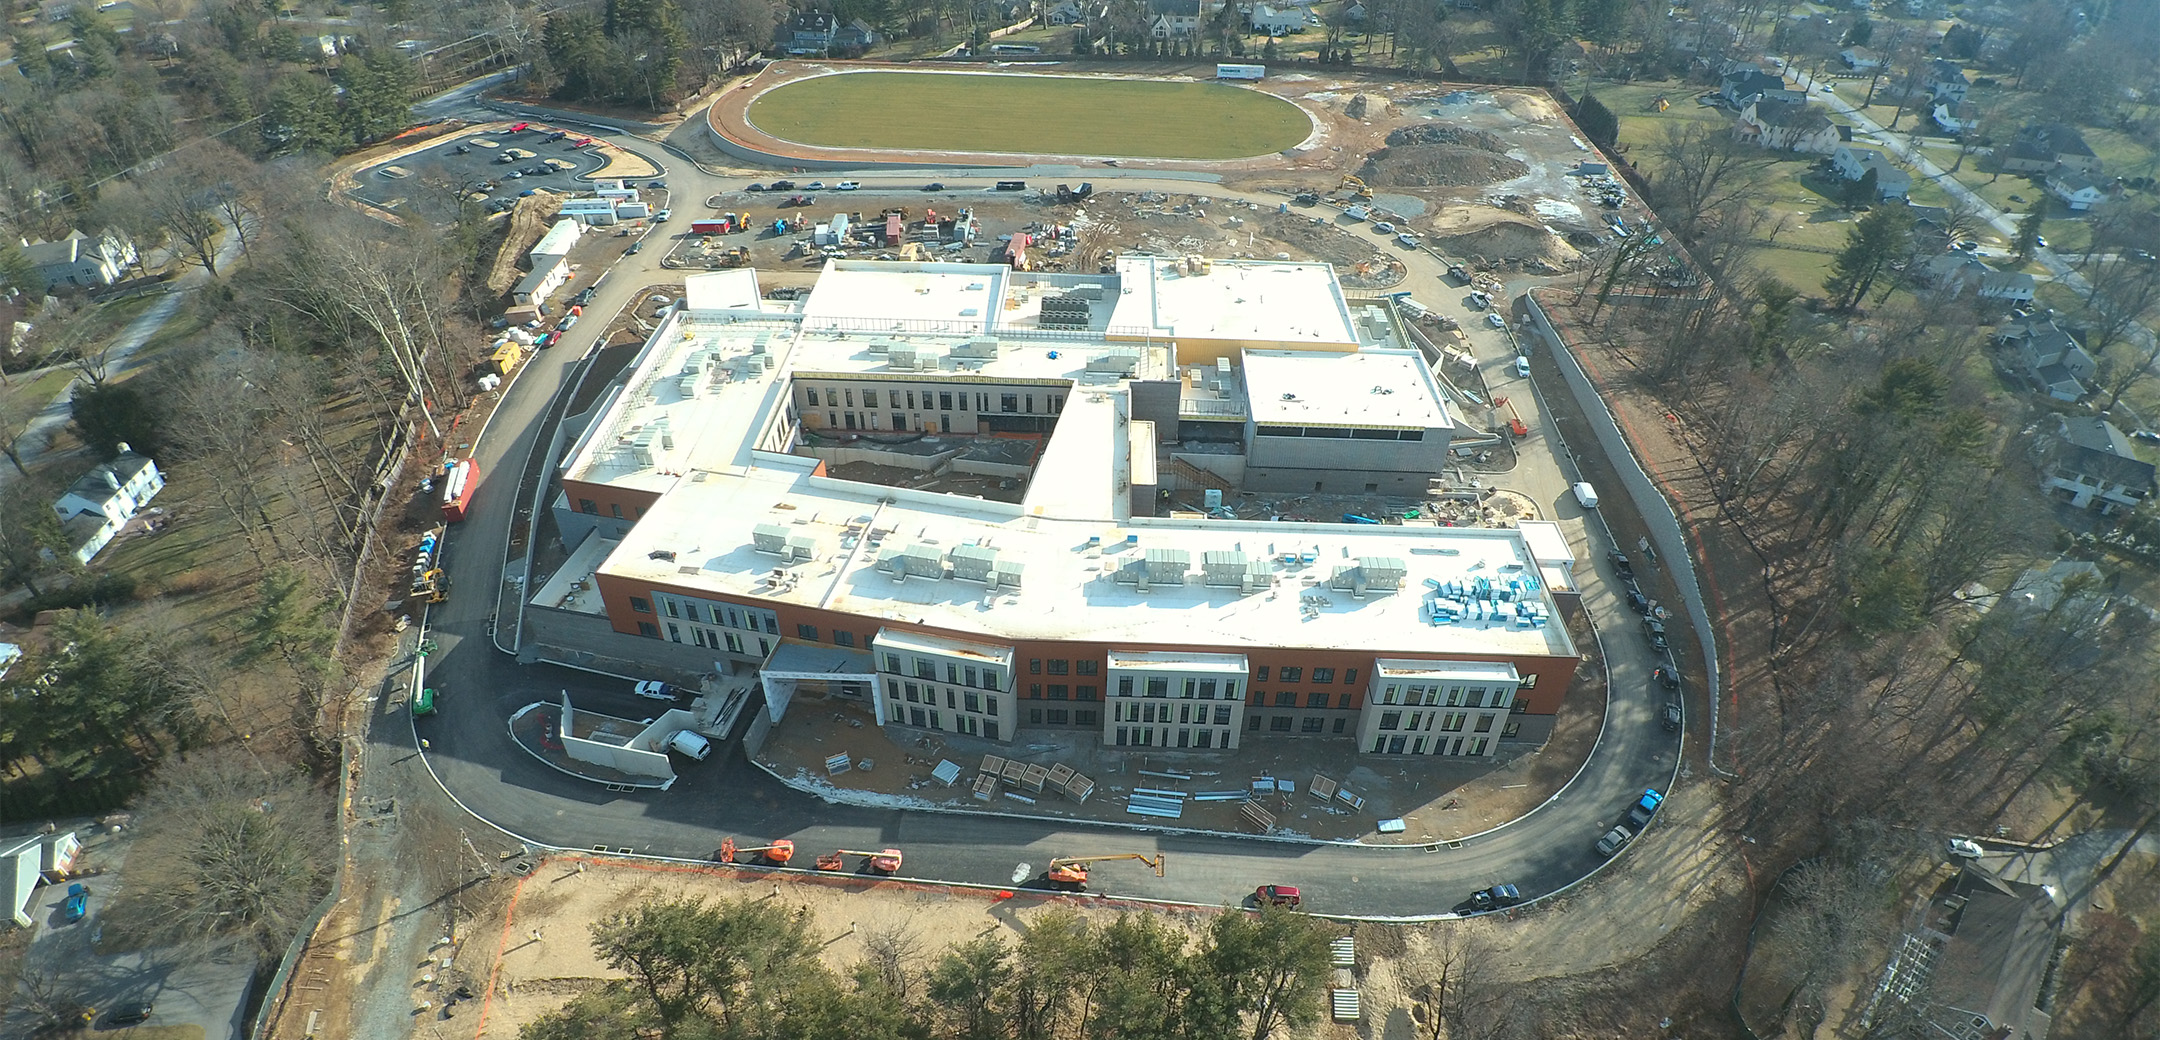 An aerial drone shot of the construction site of Black Rock Middle School showing a large buildings connected with a football field.